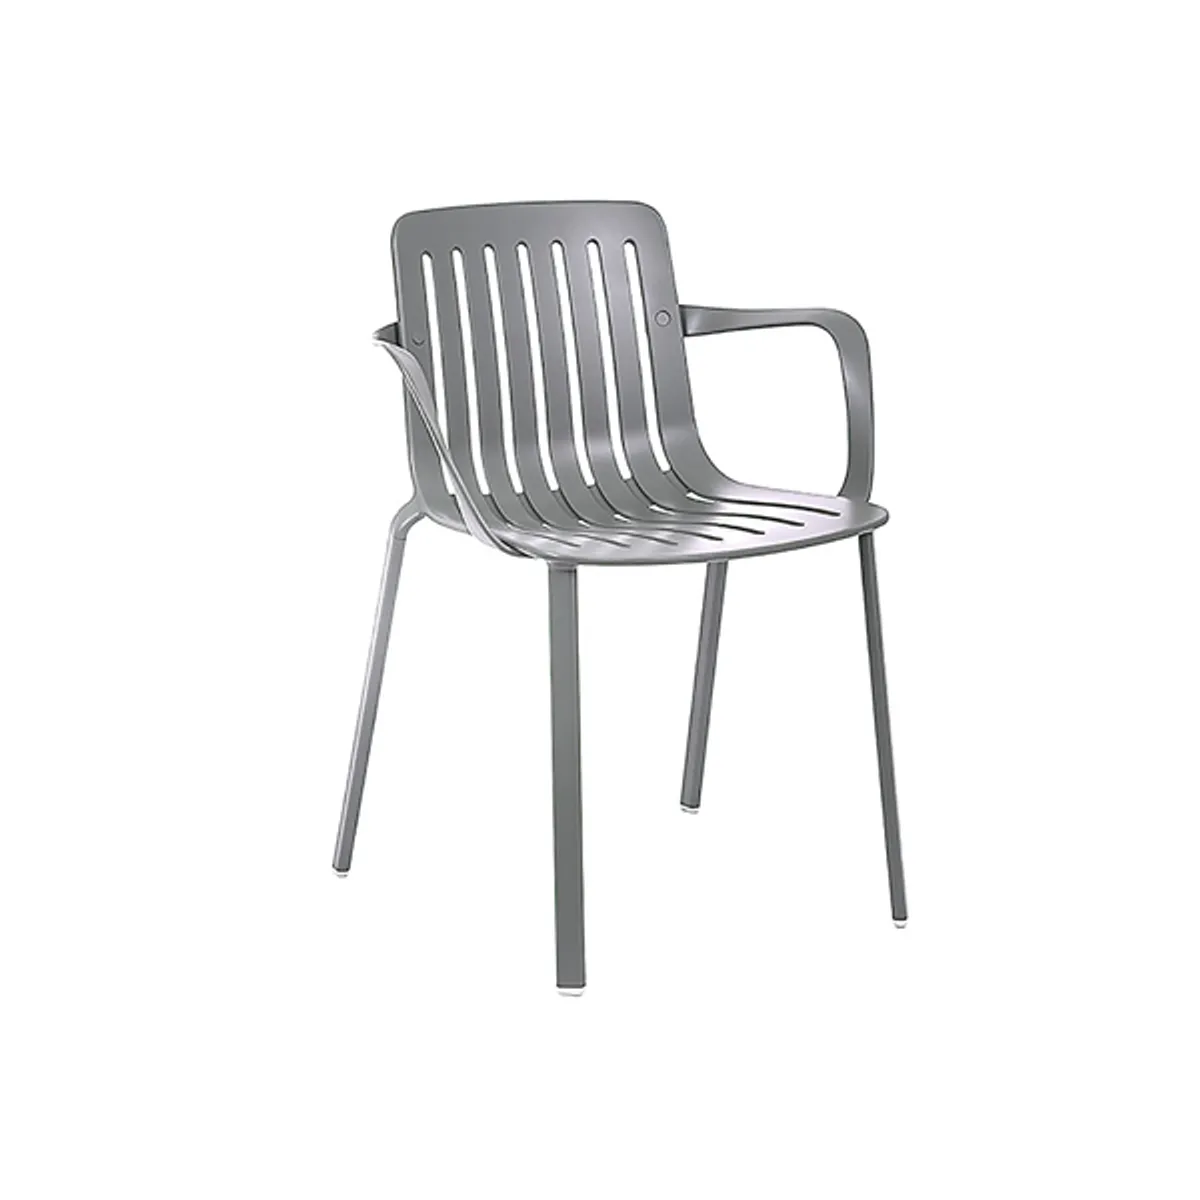 Plato armchair Inside Out Contracts2